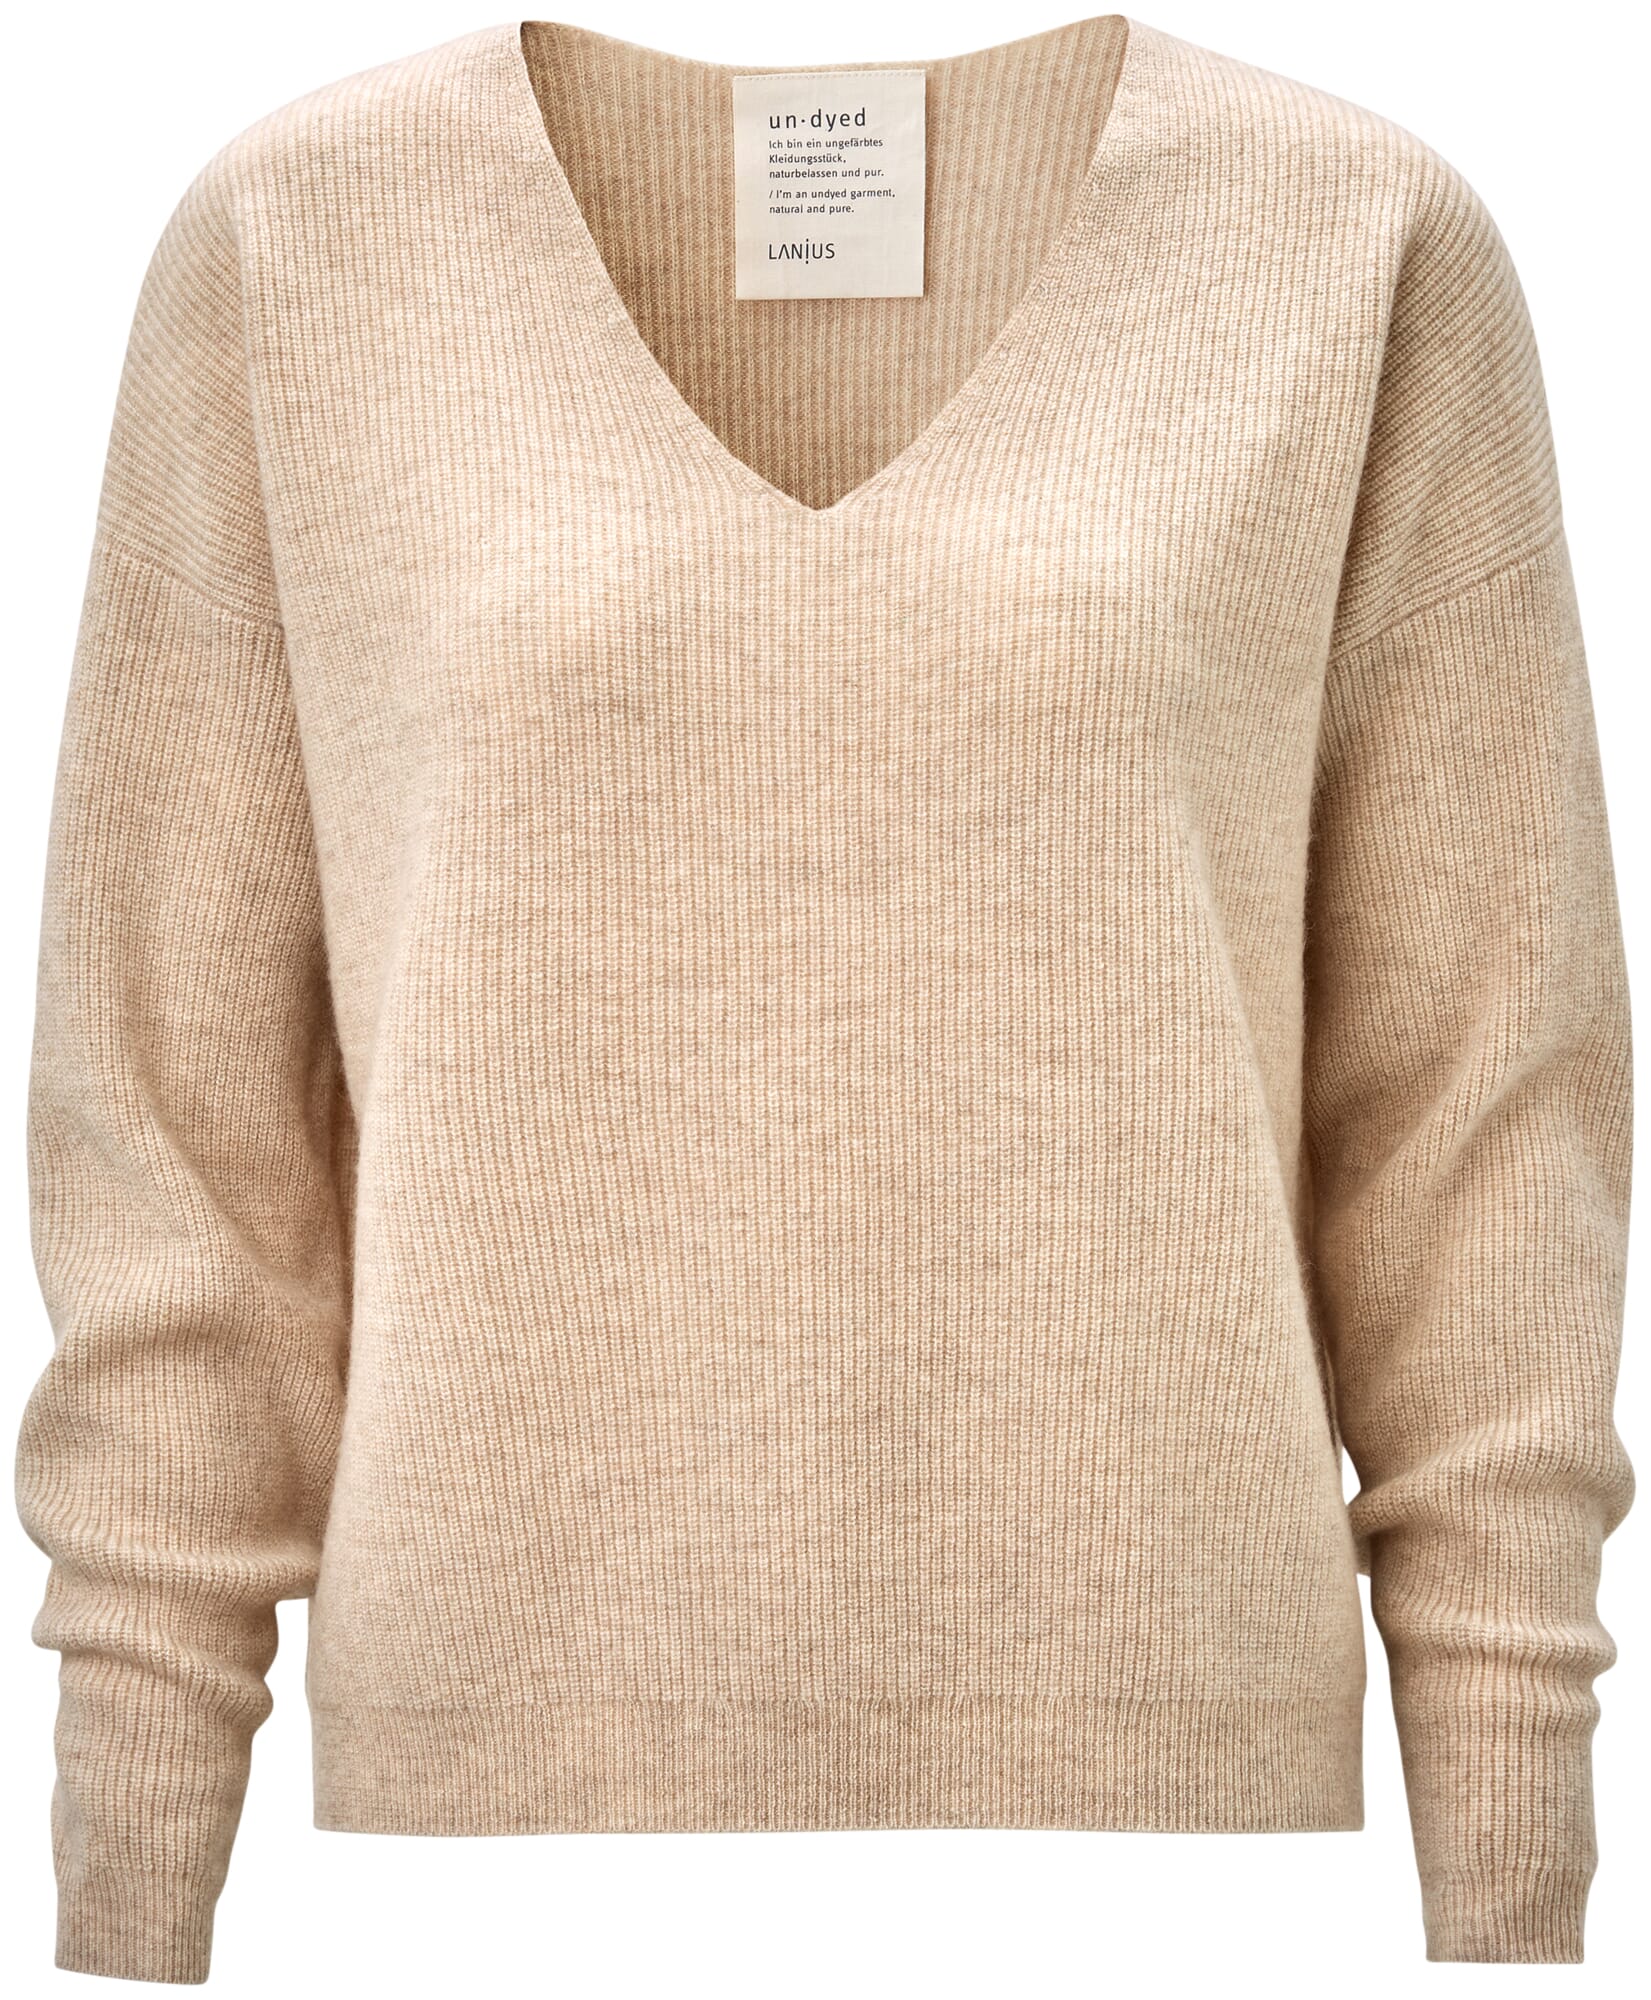 Natural Cashmere Company Jumper in Camel Womens Clothing Jumpers and knitwear Jumpers 